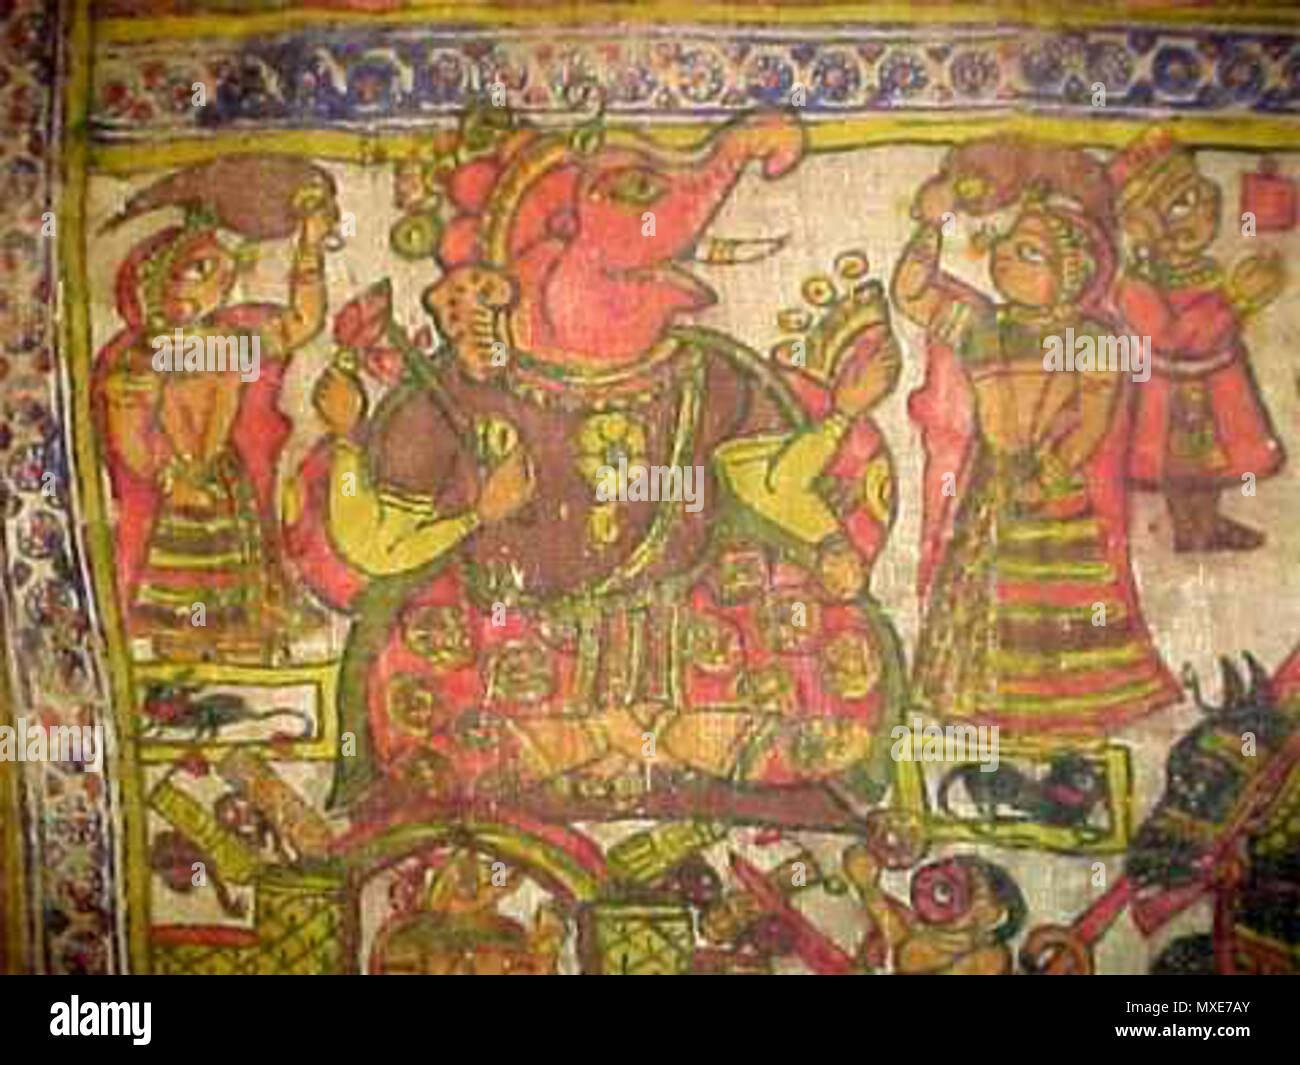 . English: A series of images of another par of Pabuji, this one from the early 19th century Source: ebay, April 2002 'This is an old (mid 1800s or earlier) Par. The painted textile is approximately 16 feet long and 55 1/2 inches wide. The story painting has been used to relay the story many times through the years and shows normal wear, especially on the bottom edge. There are some old repairs. The textile is made of two narrow pieces ( 26 3/4') sewen together. It appears to be an old linen-type material.' . early 19th century. Unknown 462 Pabuji2h Stock Photo